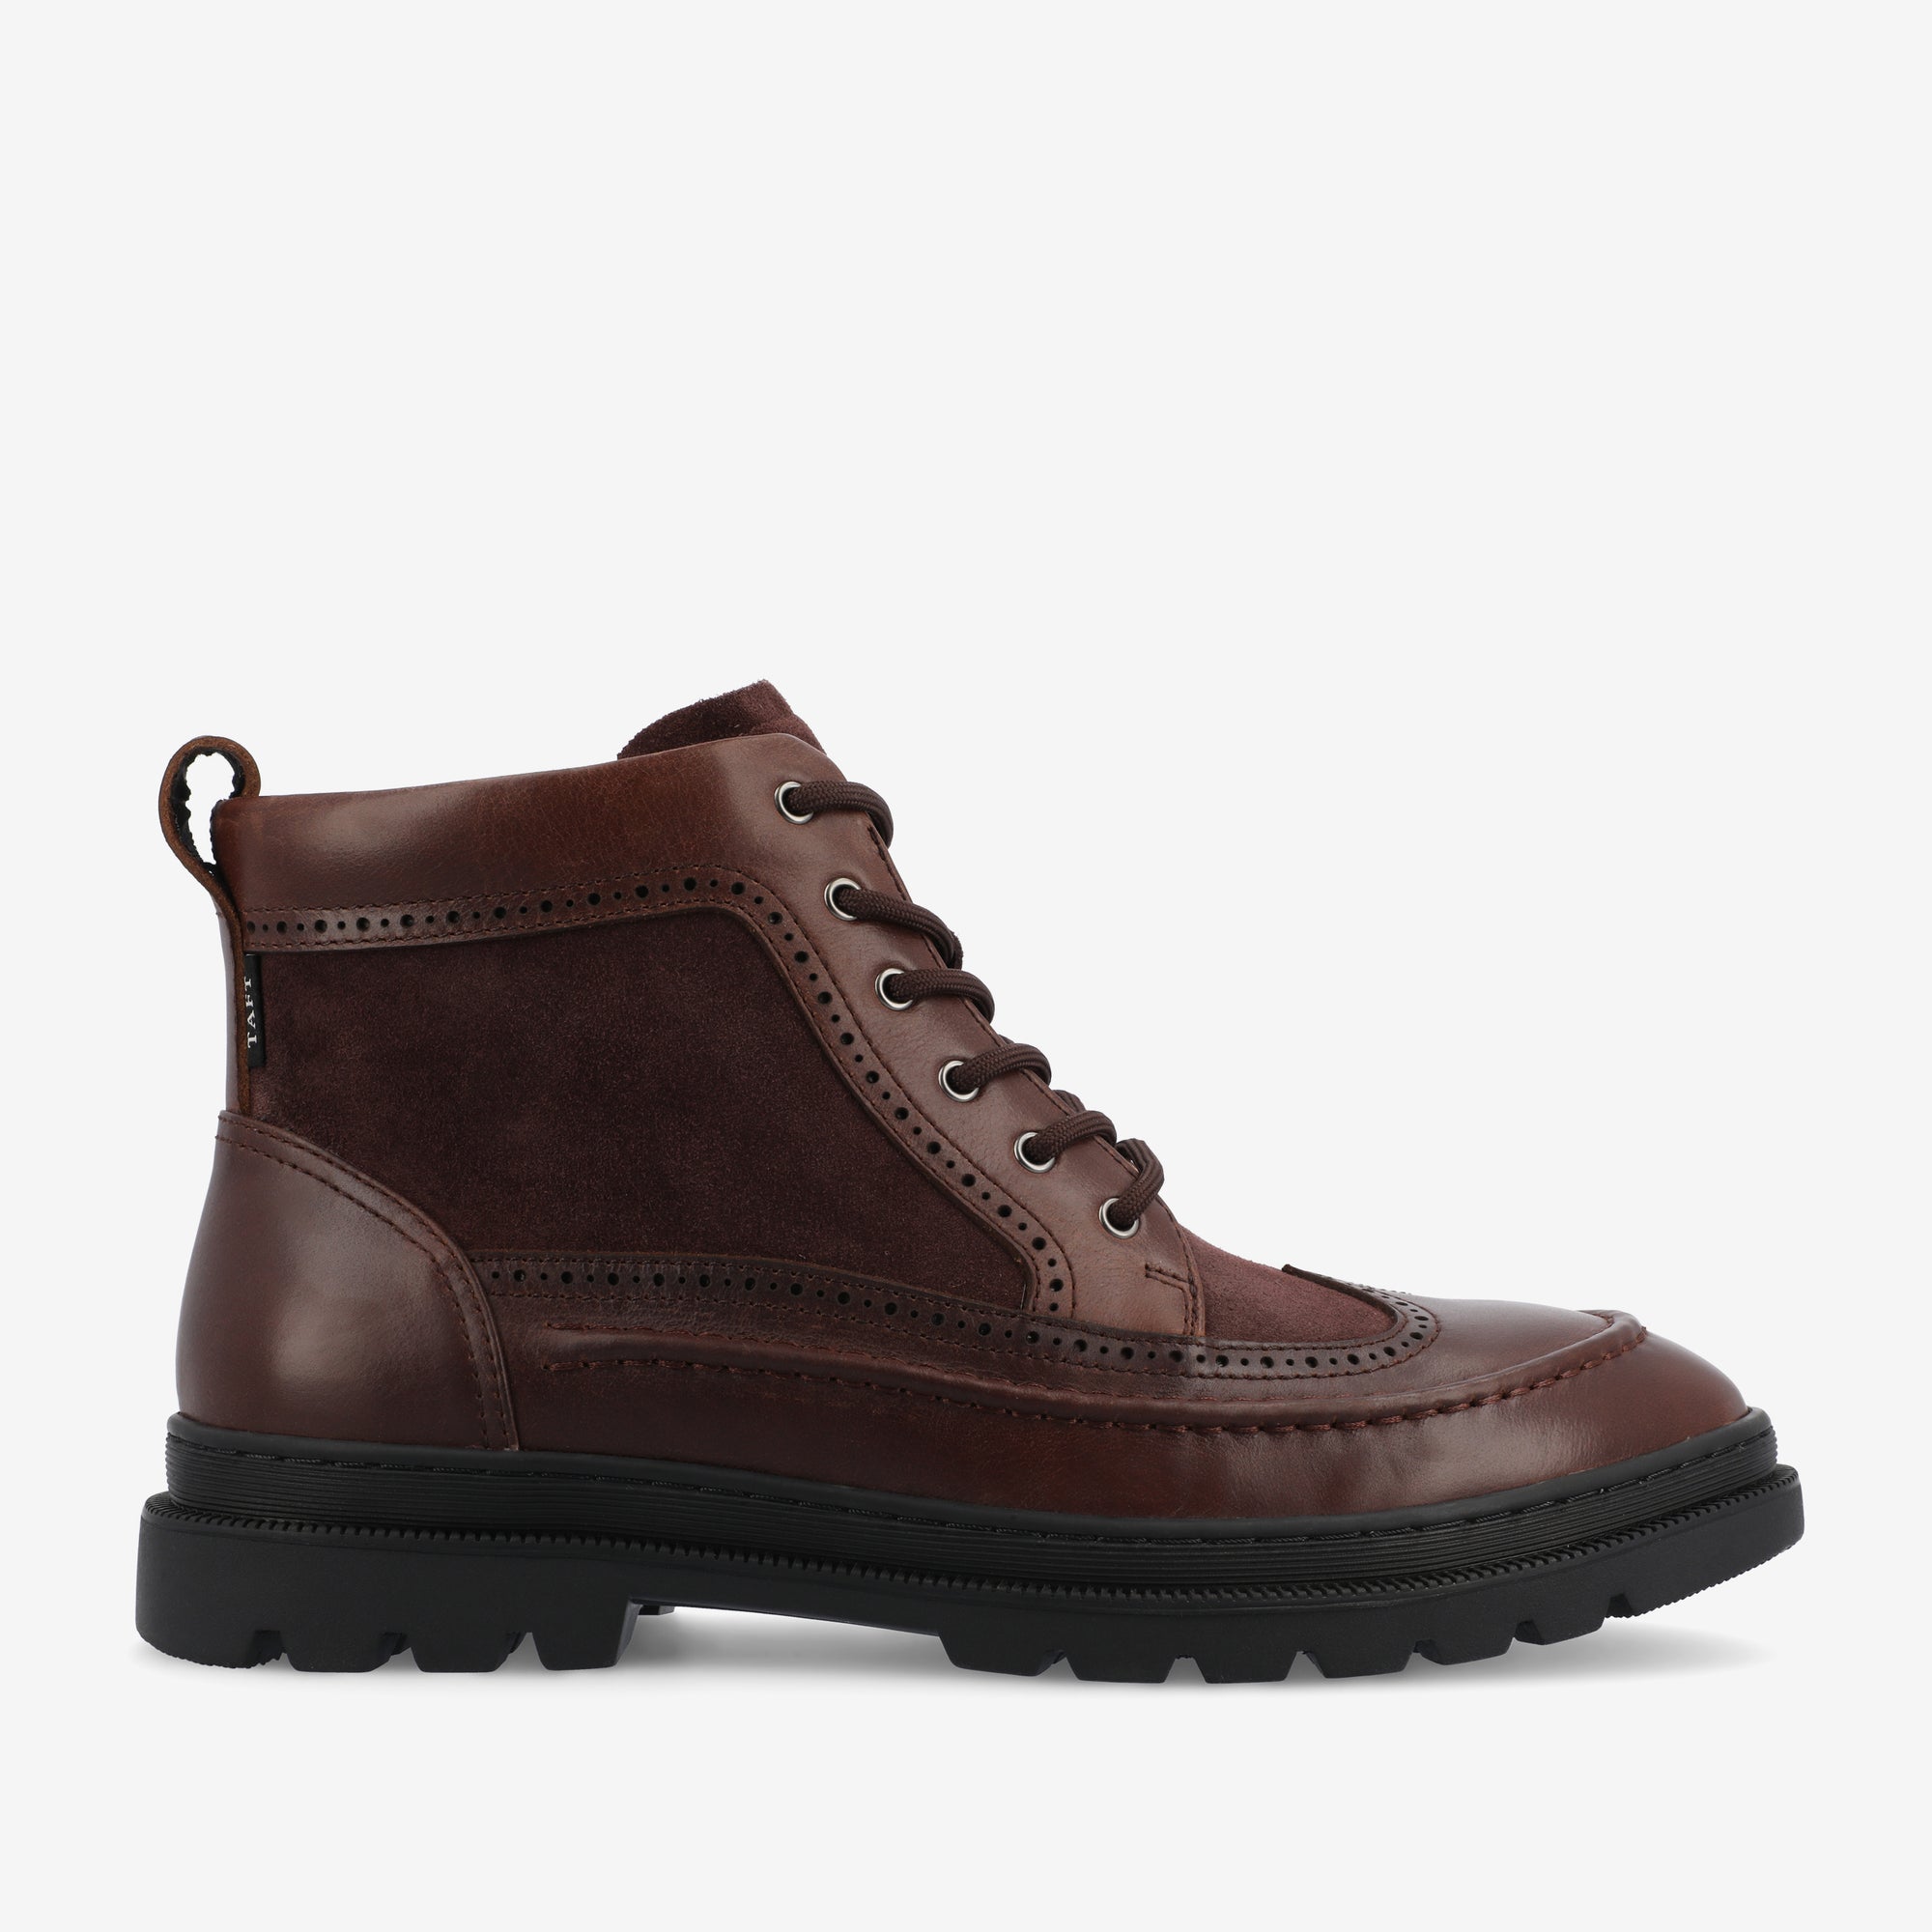 Model 008 Boot In Chocolate